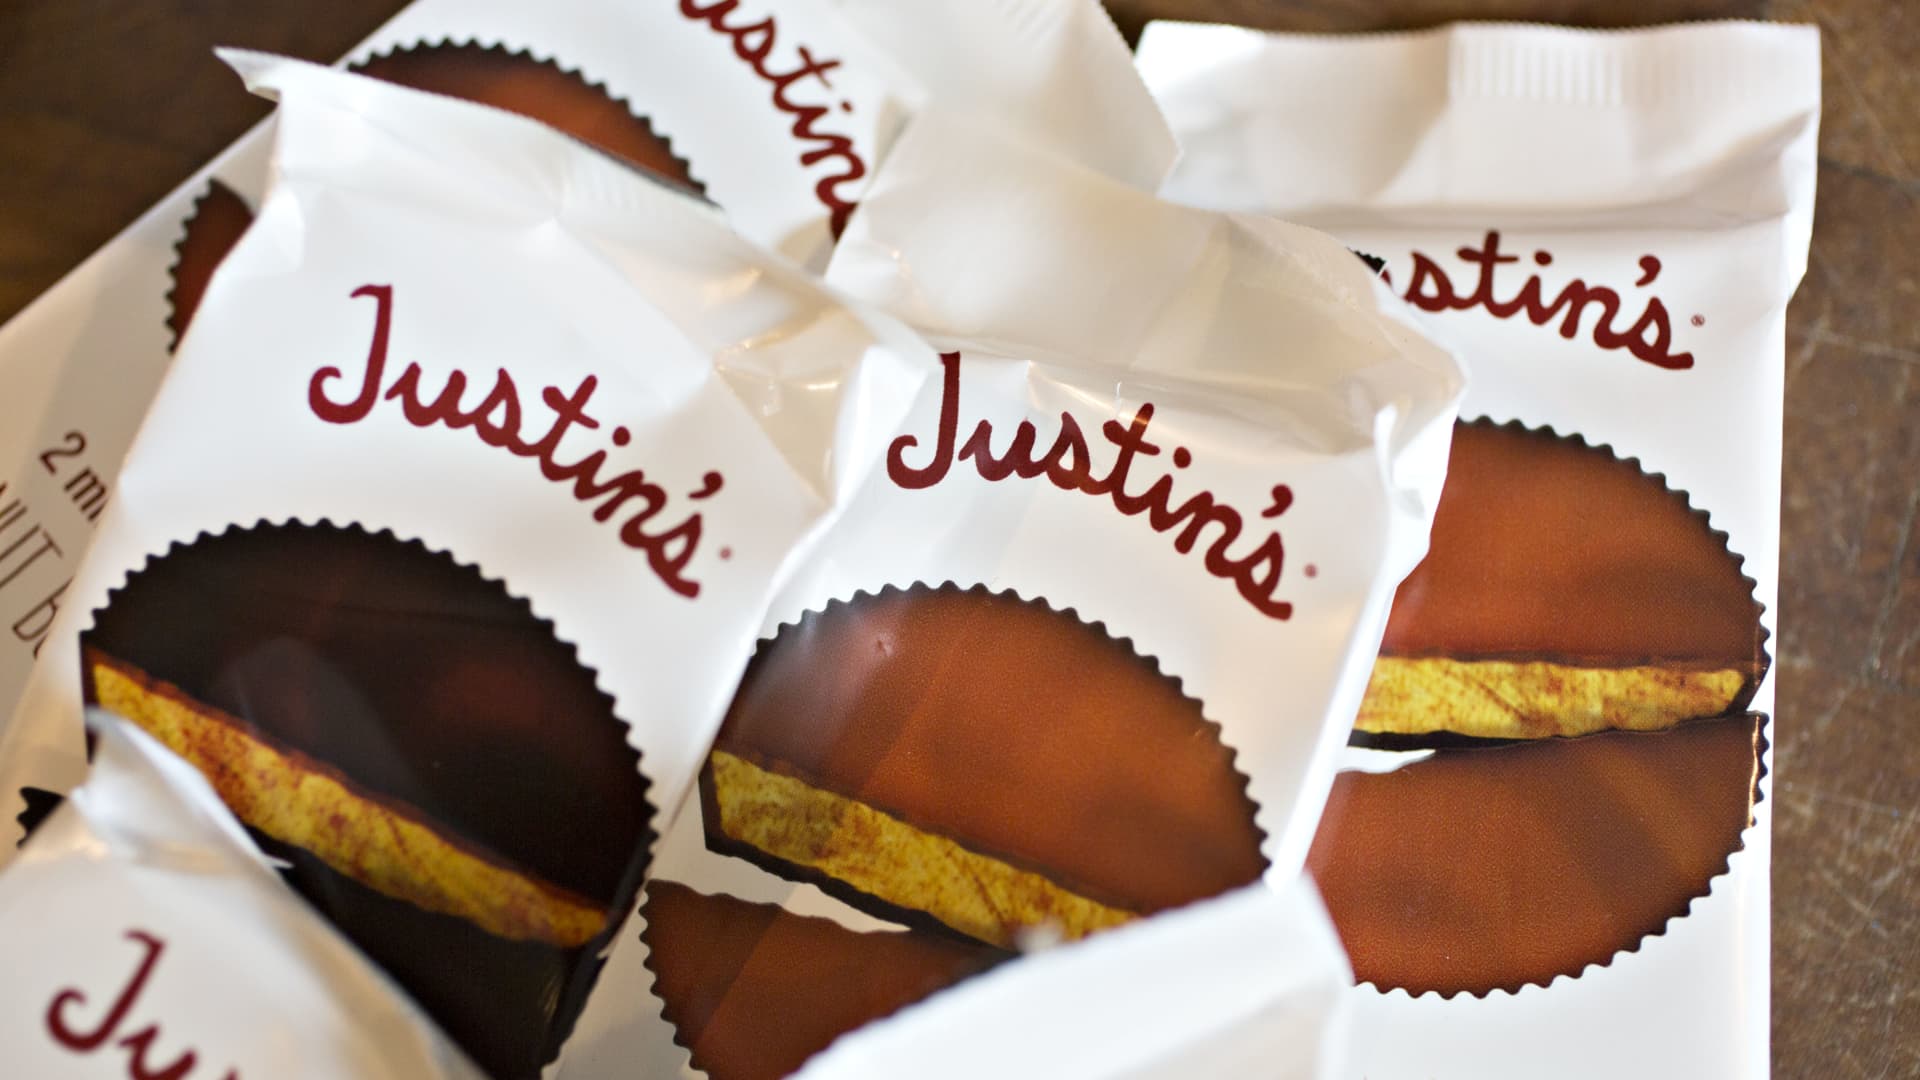 Packages of Justin's brand peanut butter cups are arranged for a photograph in Tiskilwa, Illinois, U.S., on Monday, Aug. 15, 2016. 